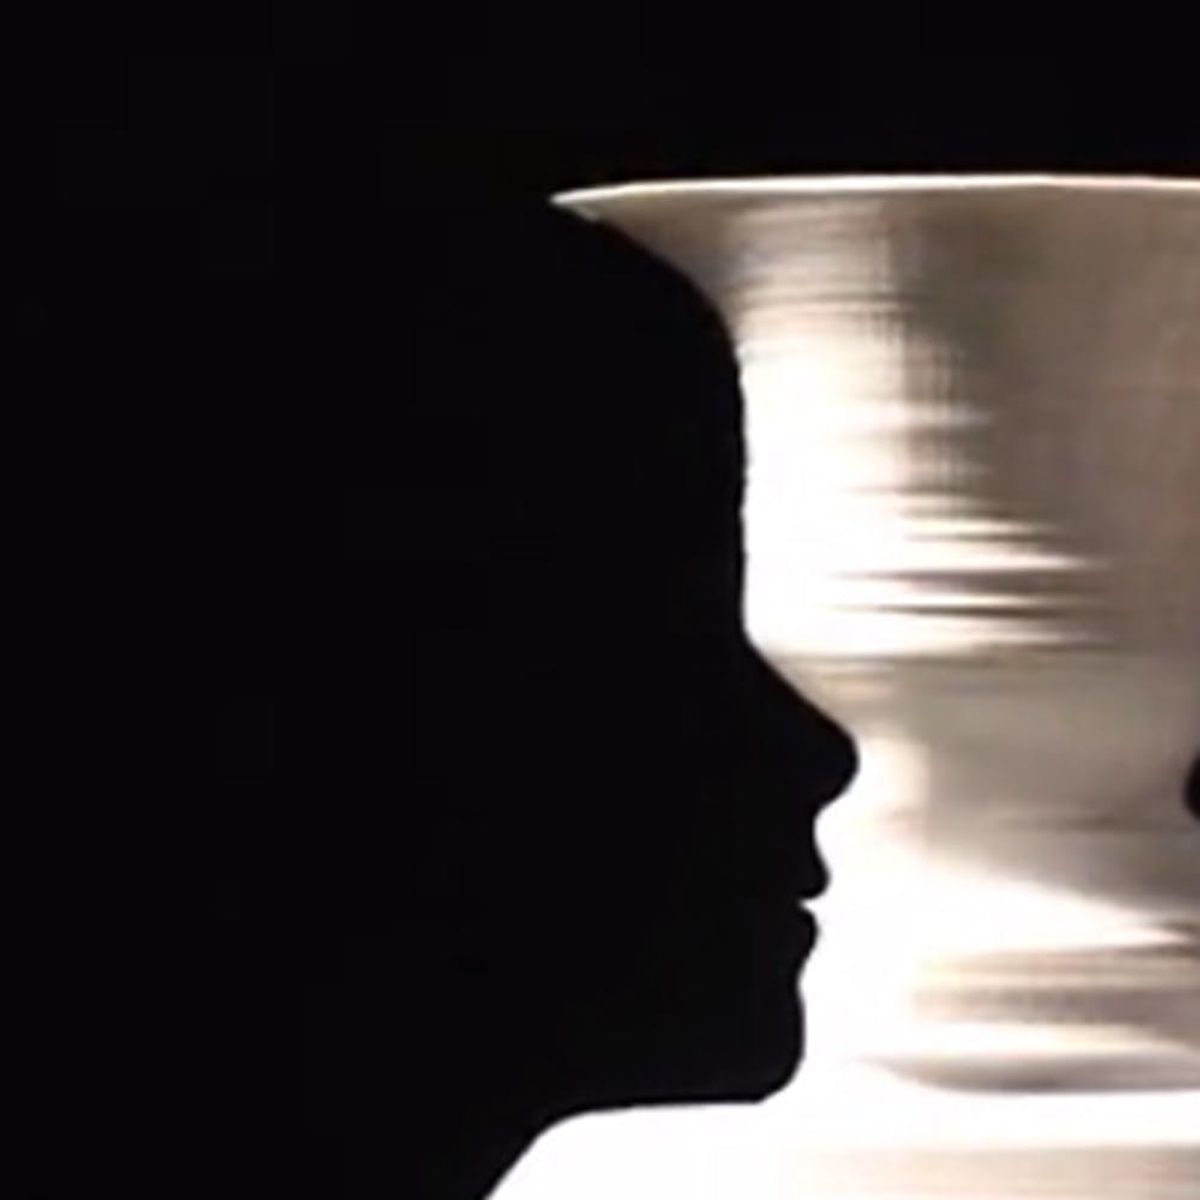 Can You Spot the Optical Illusion in This 3D Printed Vase?